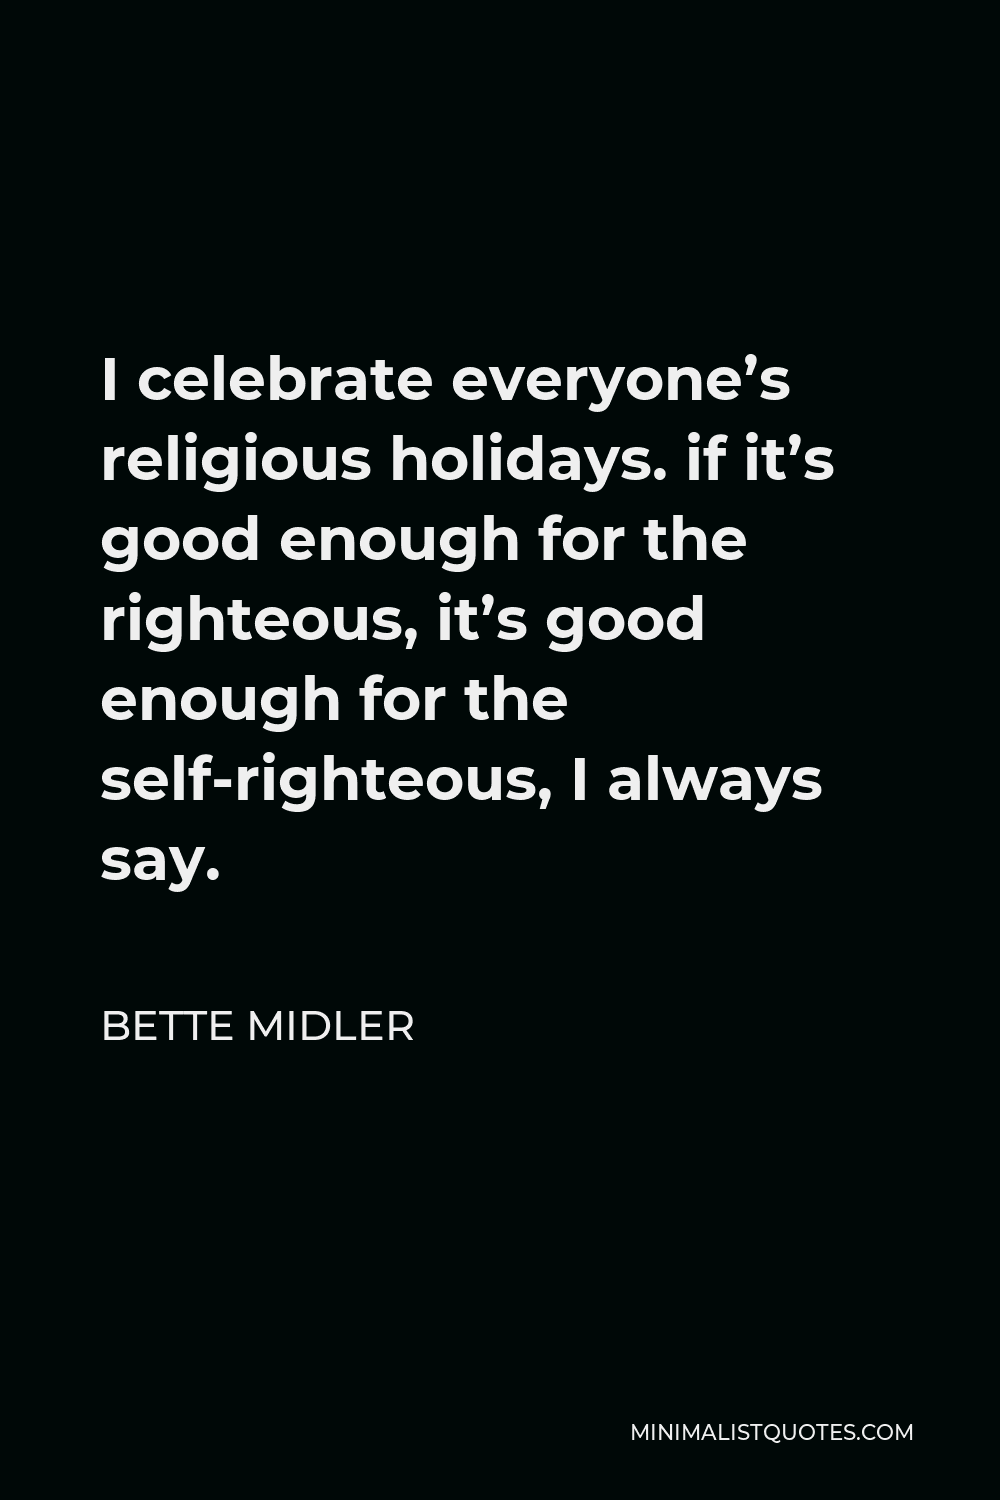 Bette Midler Quote - I celebrate everyone’s religious holidays. if it’s good enough for the righteous, it’s good enough for the self-righteous, I always say.